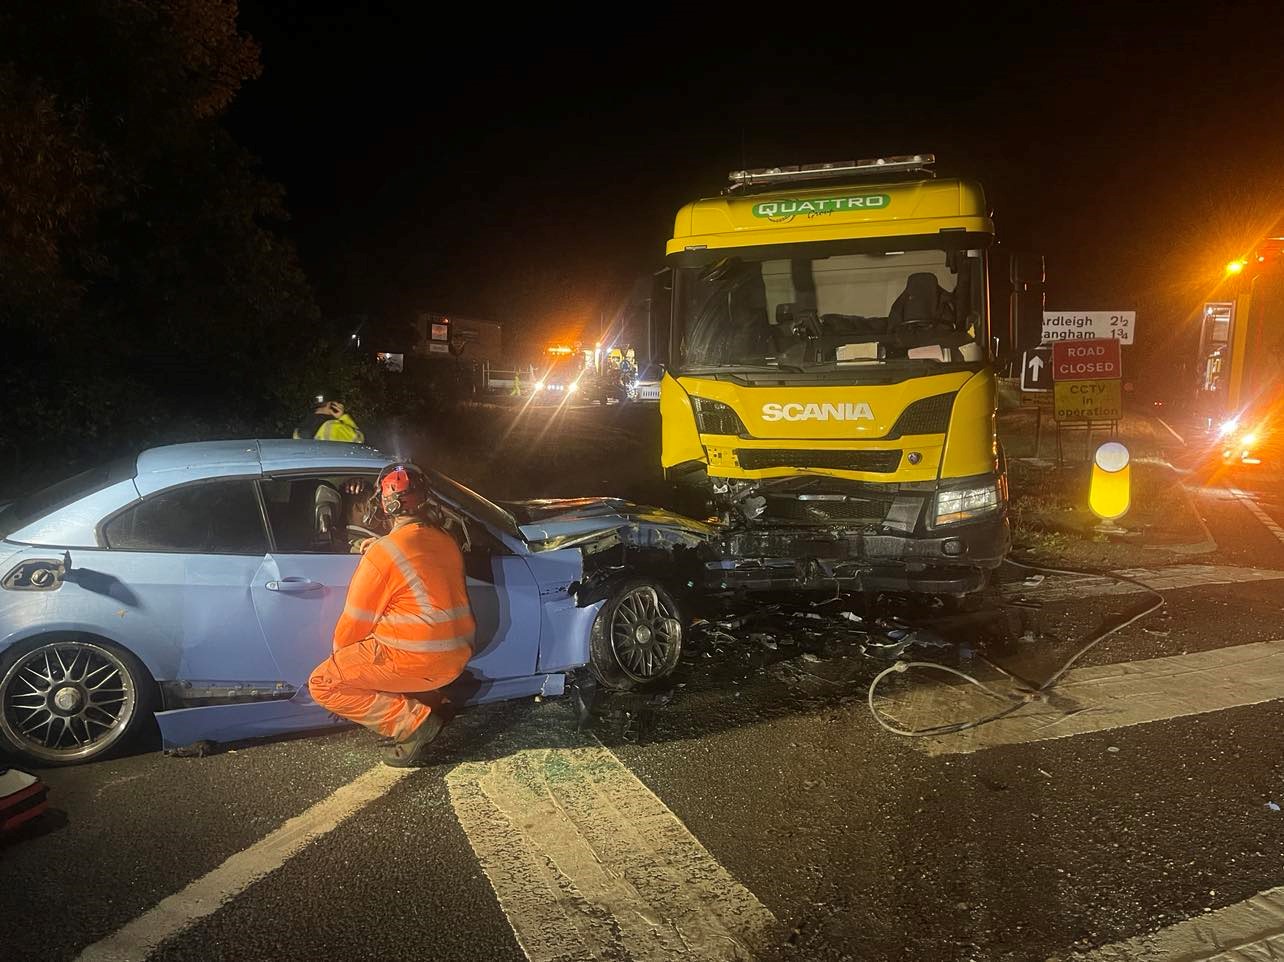 The driver of this car had to be cut from his vehicle after he entered a closed roadwork area and collided with a contractor's truck. He was subsequently prosecuted for driving without due and attention, given 3 penalty points and £100 fine.